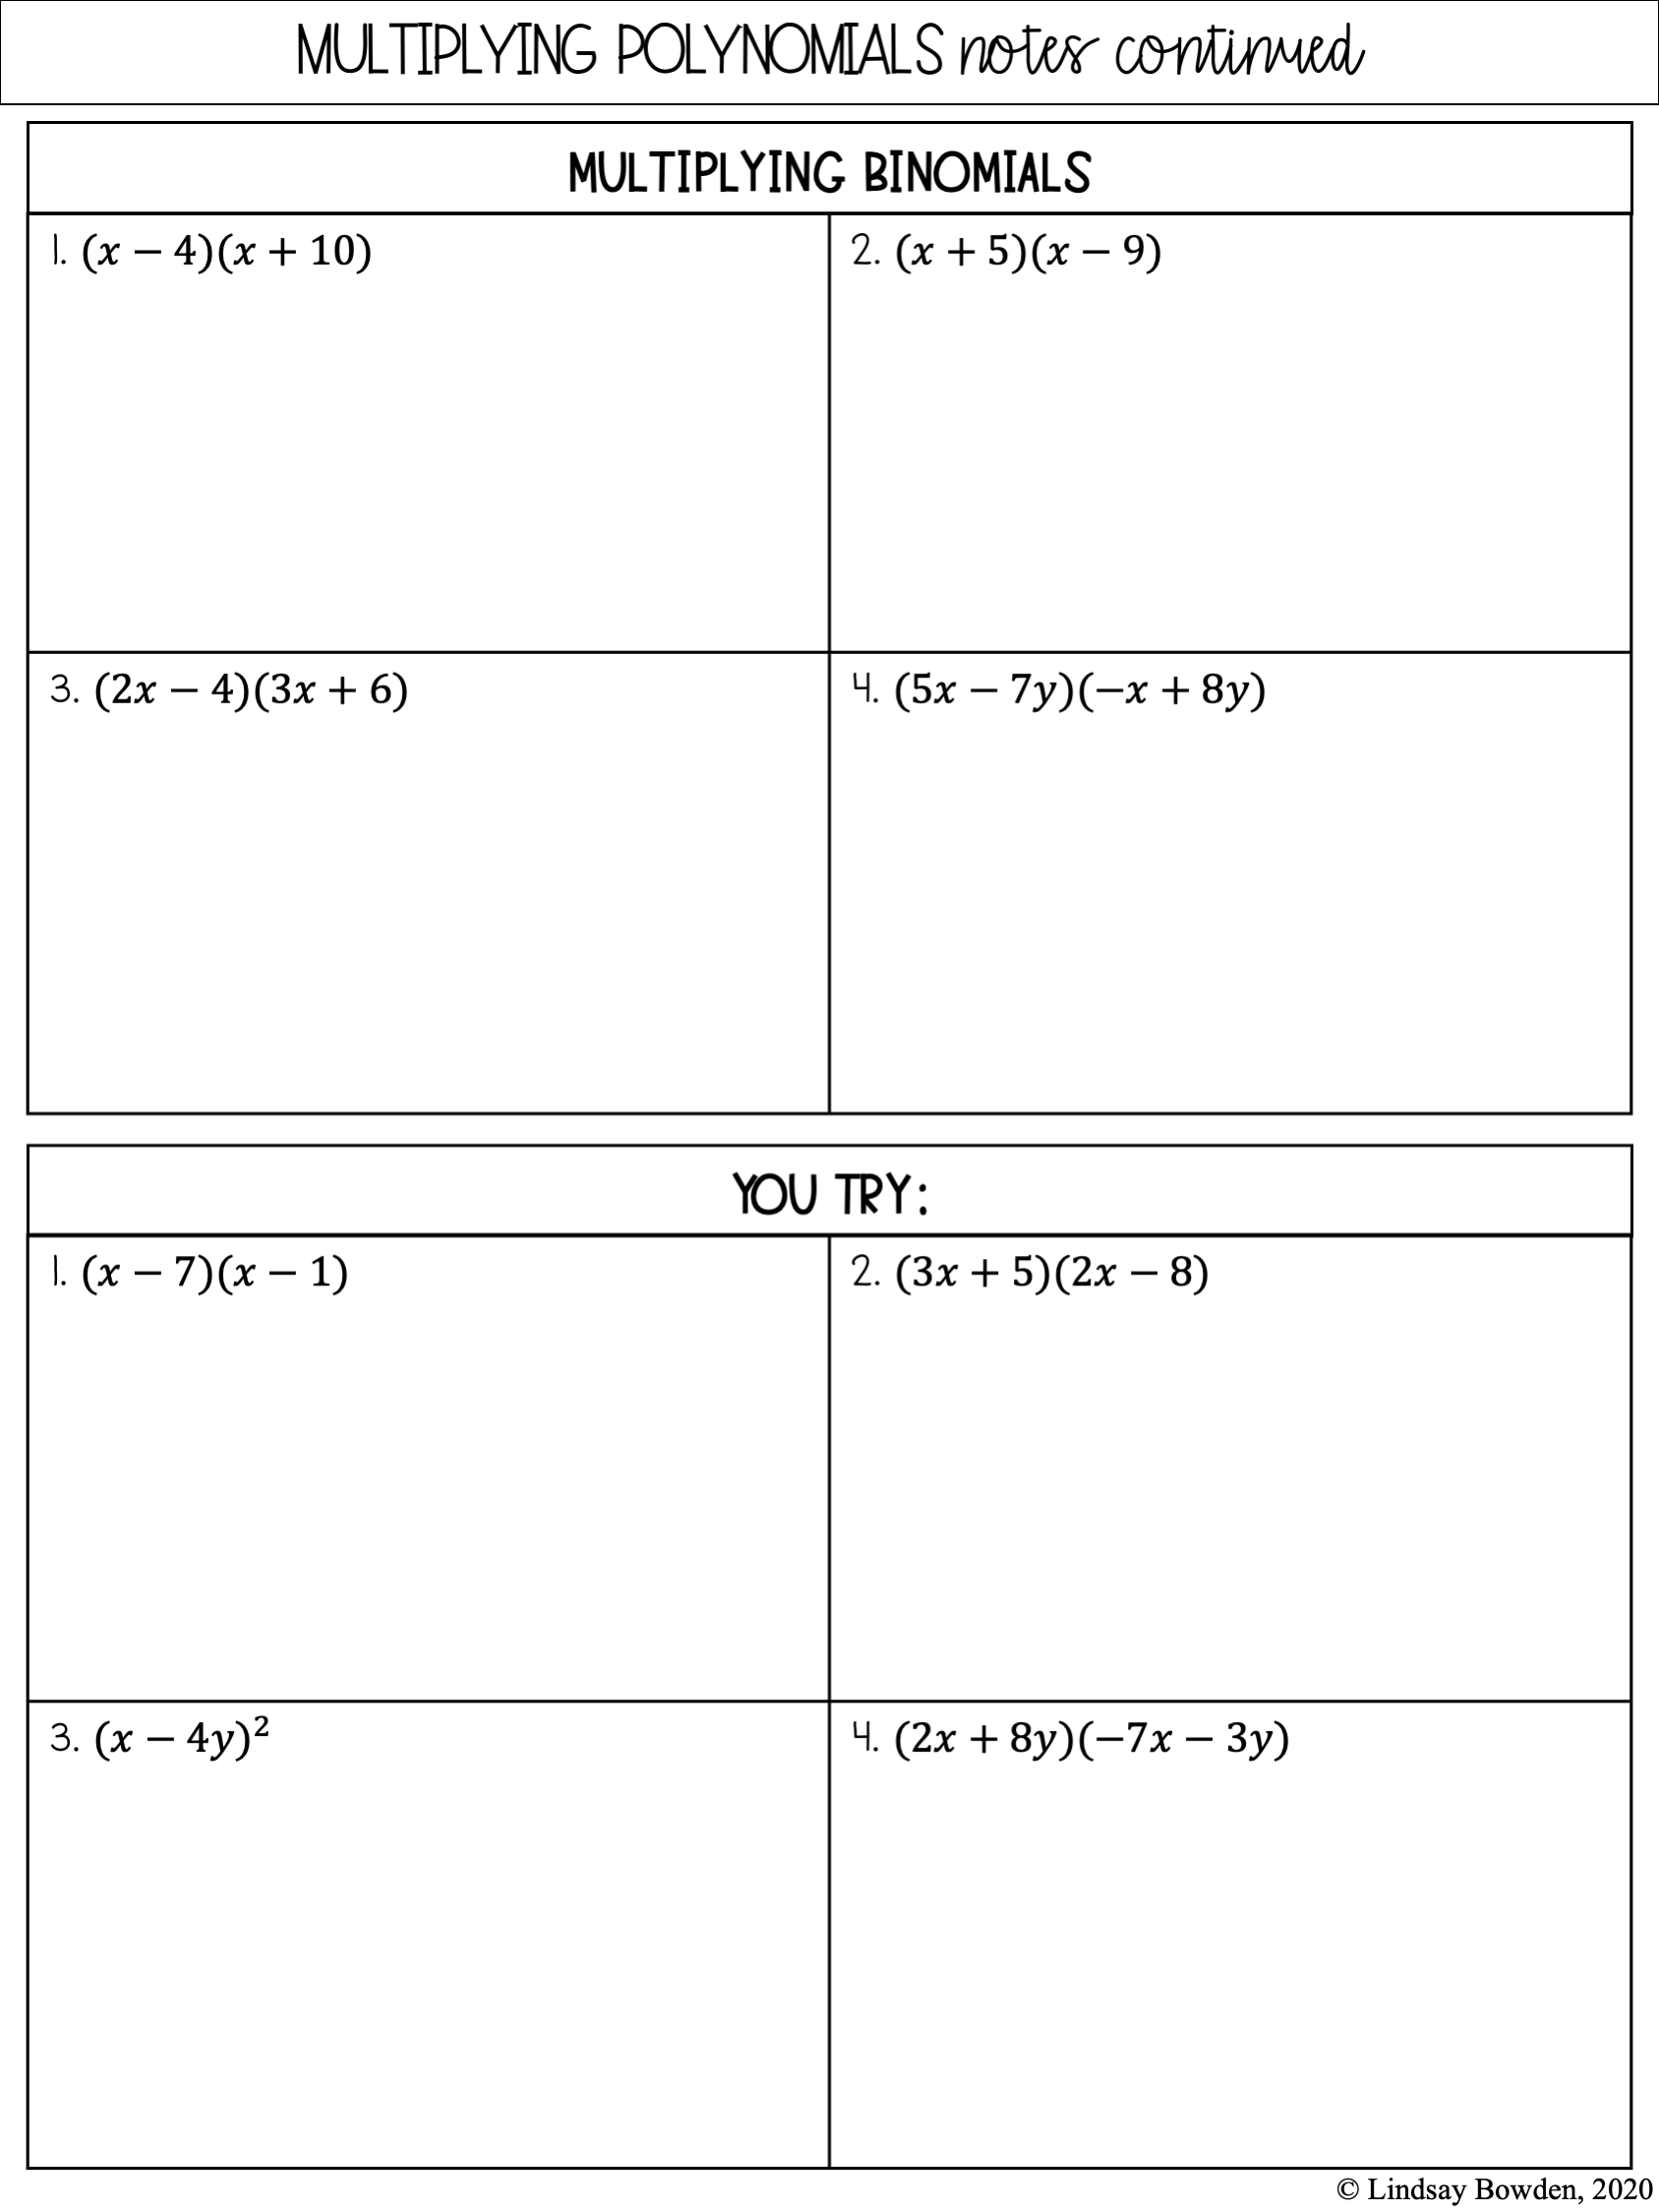 Multiplying Polynomials Worksheets